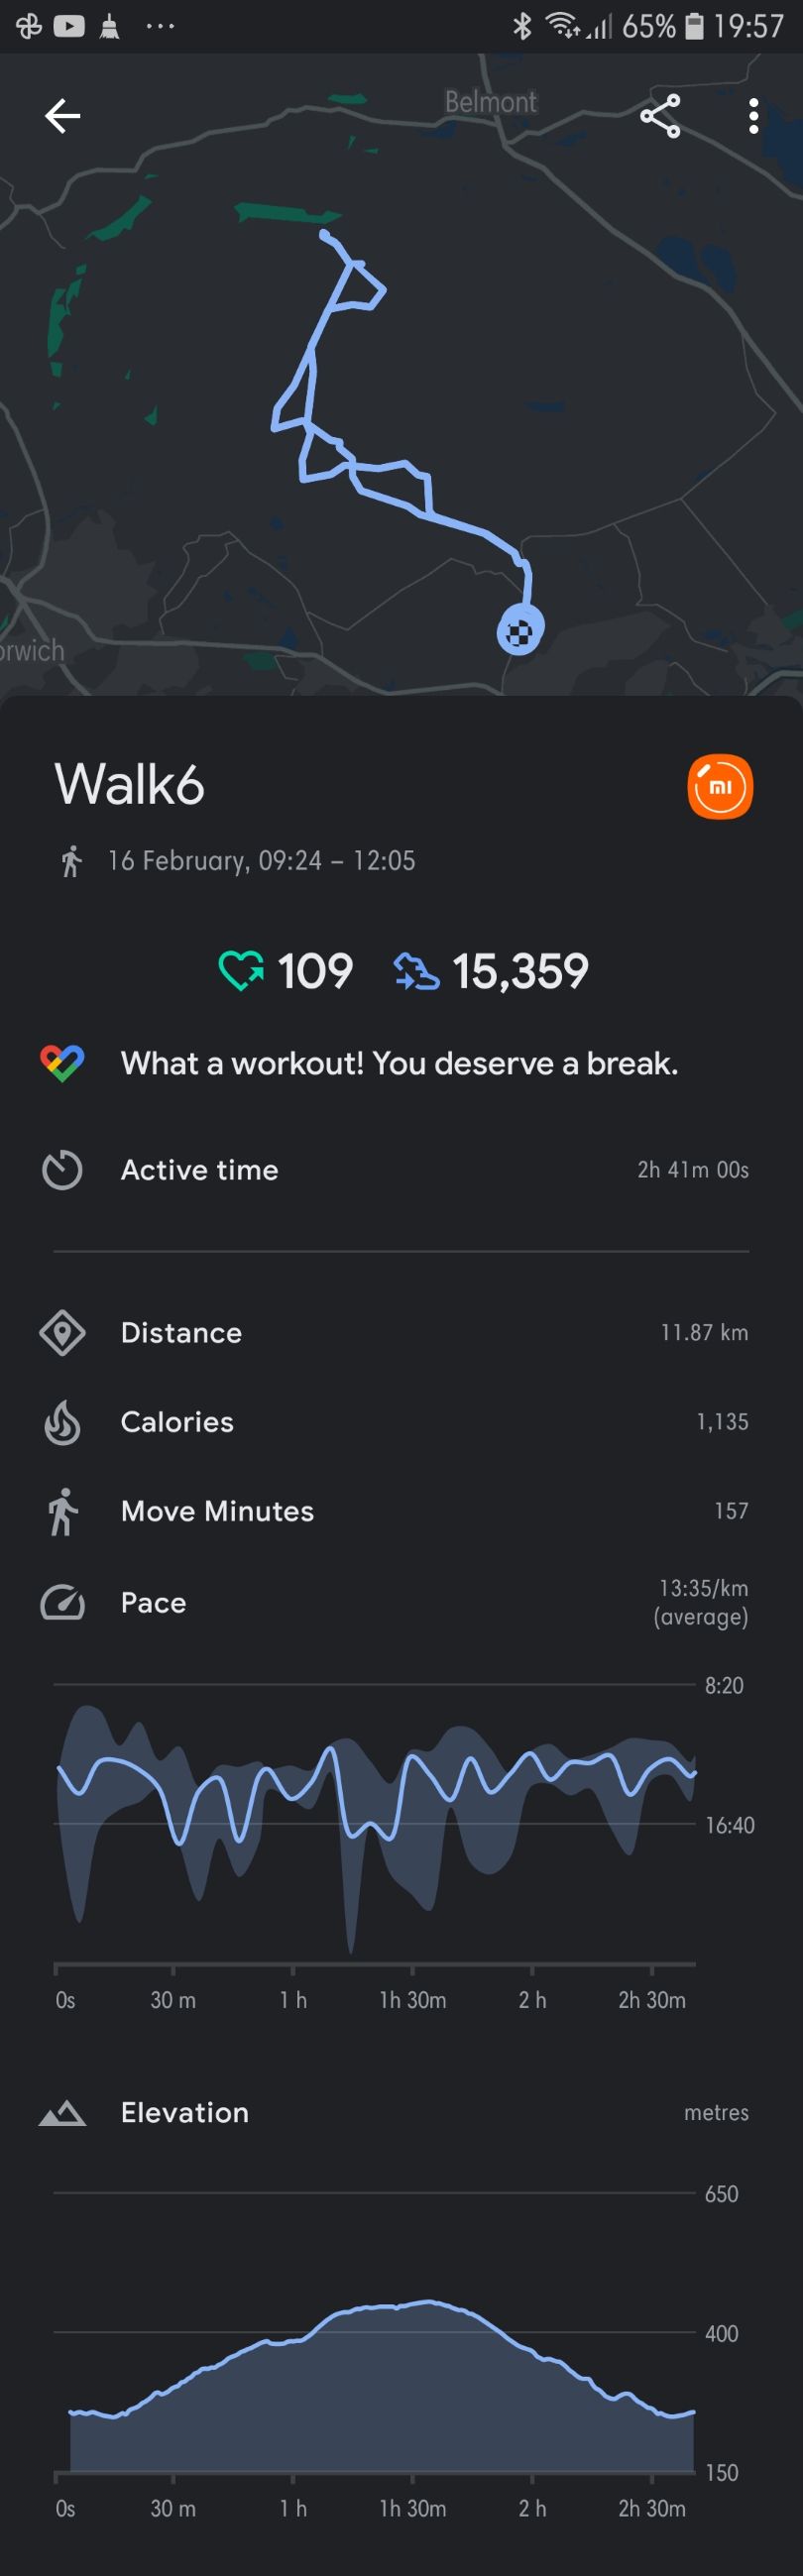 google fit data into fitbit app